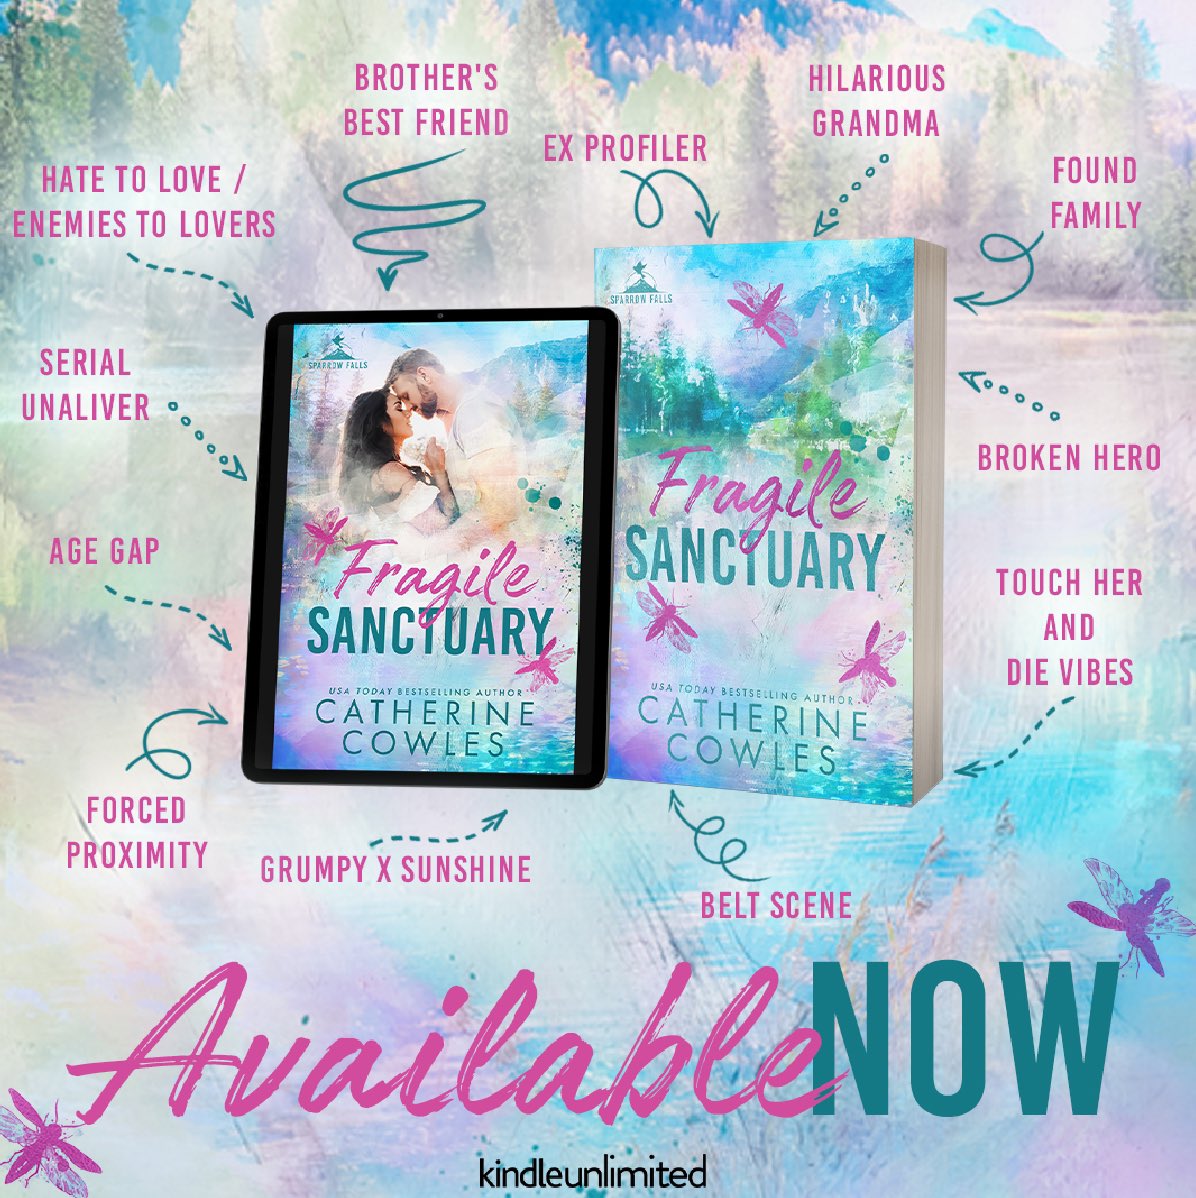 💗FRAGILE SANCTUARY IS LIVE🎉 A brand-new small town romance from @CatherineCowles is available now! Get Your Copy - geni.us/FragileSanctua… #smalltownromance #catherinecowles #brothersbestfriendtrope #agegaptrope #slowburnromance #newromancerelease #ansonandrhodes